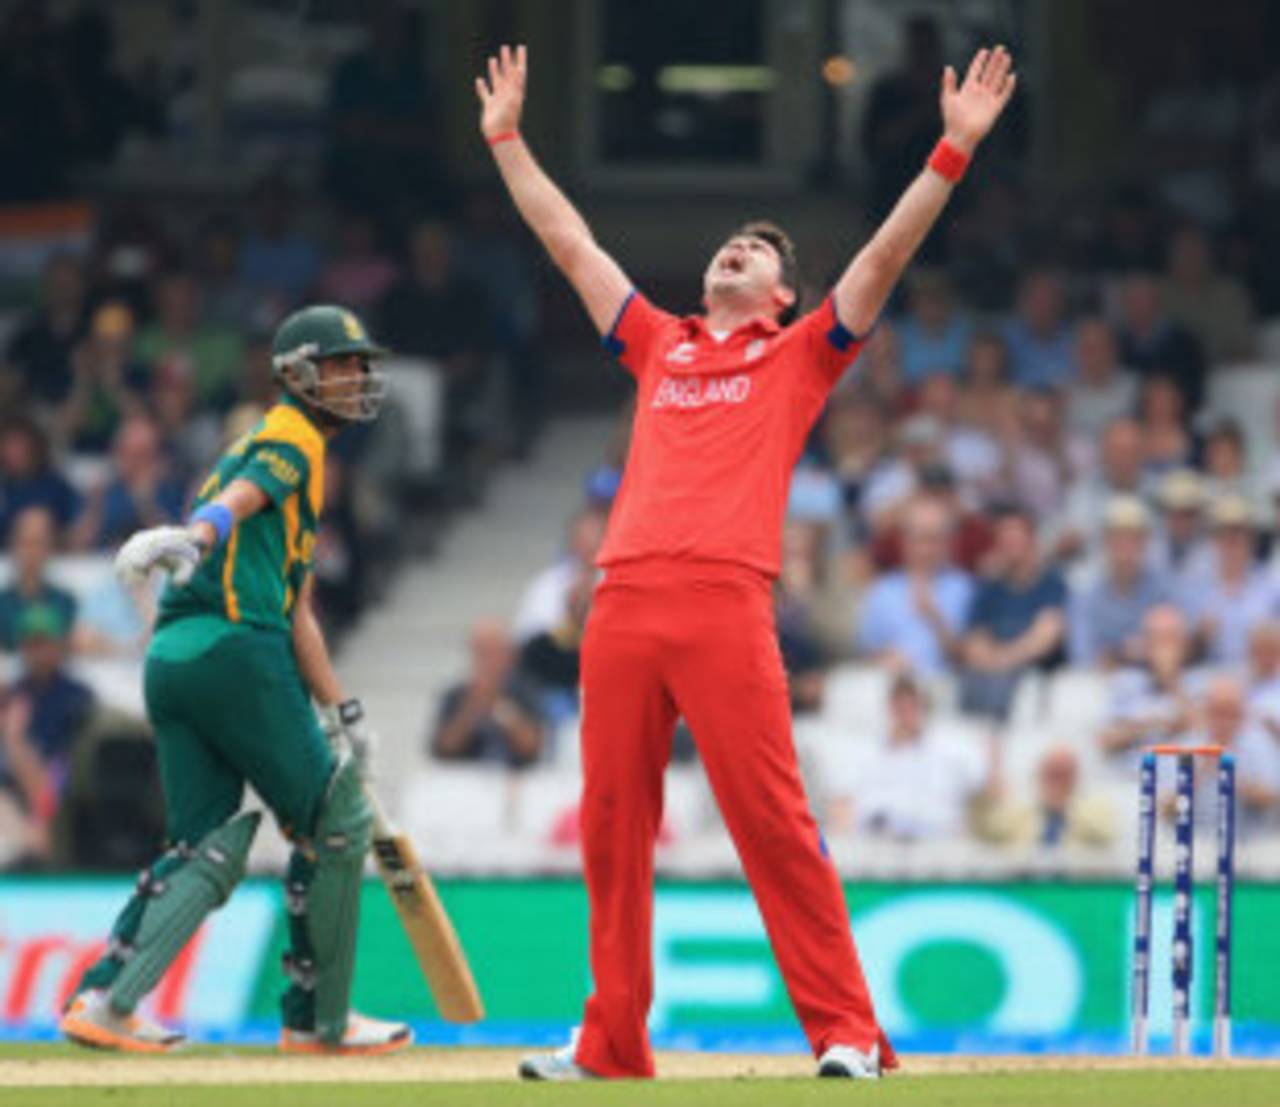 James Anderson exults after trapping Robin Peterson plumb in front, England v South Africa, 1st semi-final, Champions Trophy, The Oval, June 19, 2013